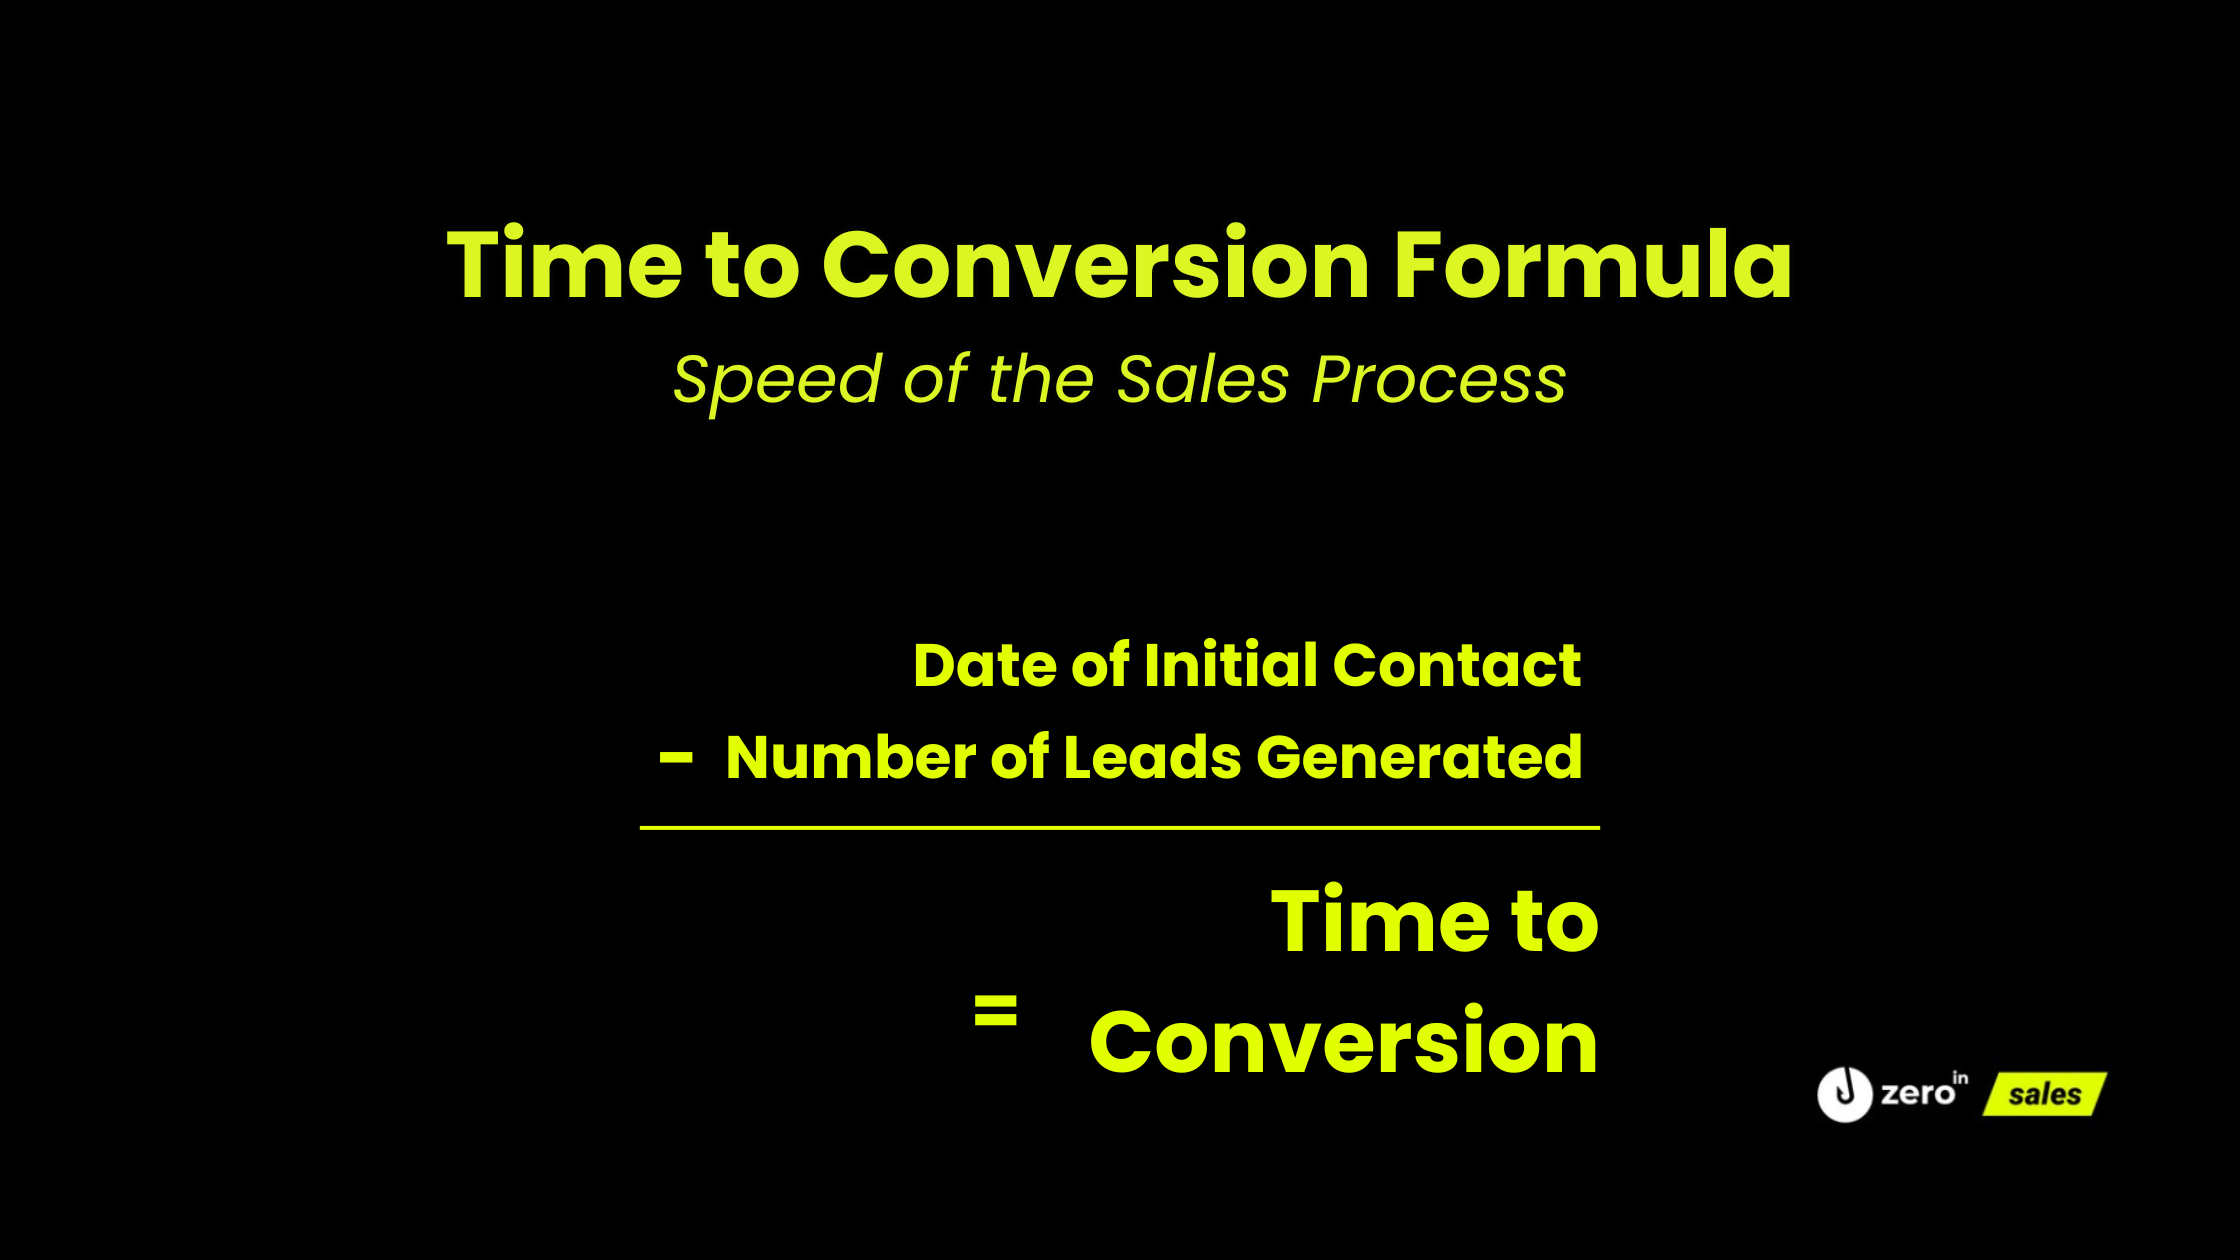 Time to Conversion Speed of the Sales Process